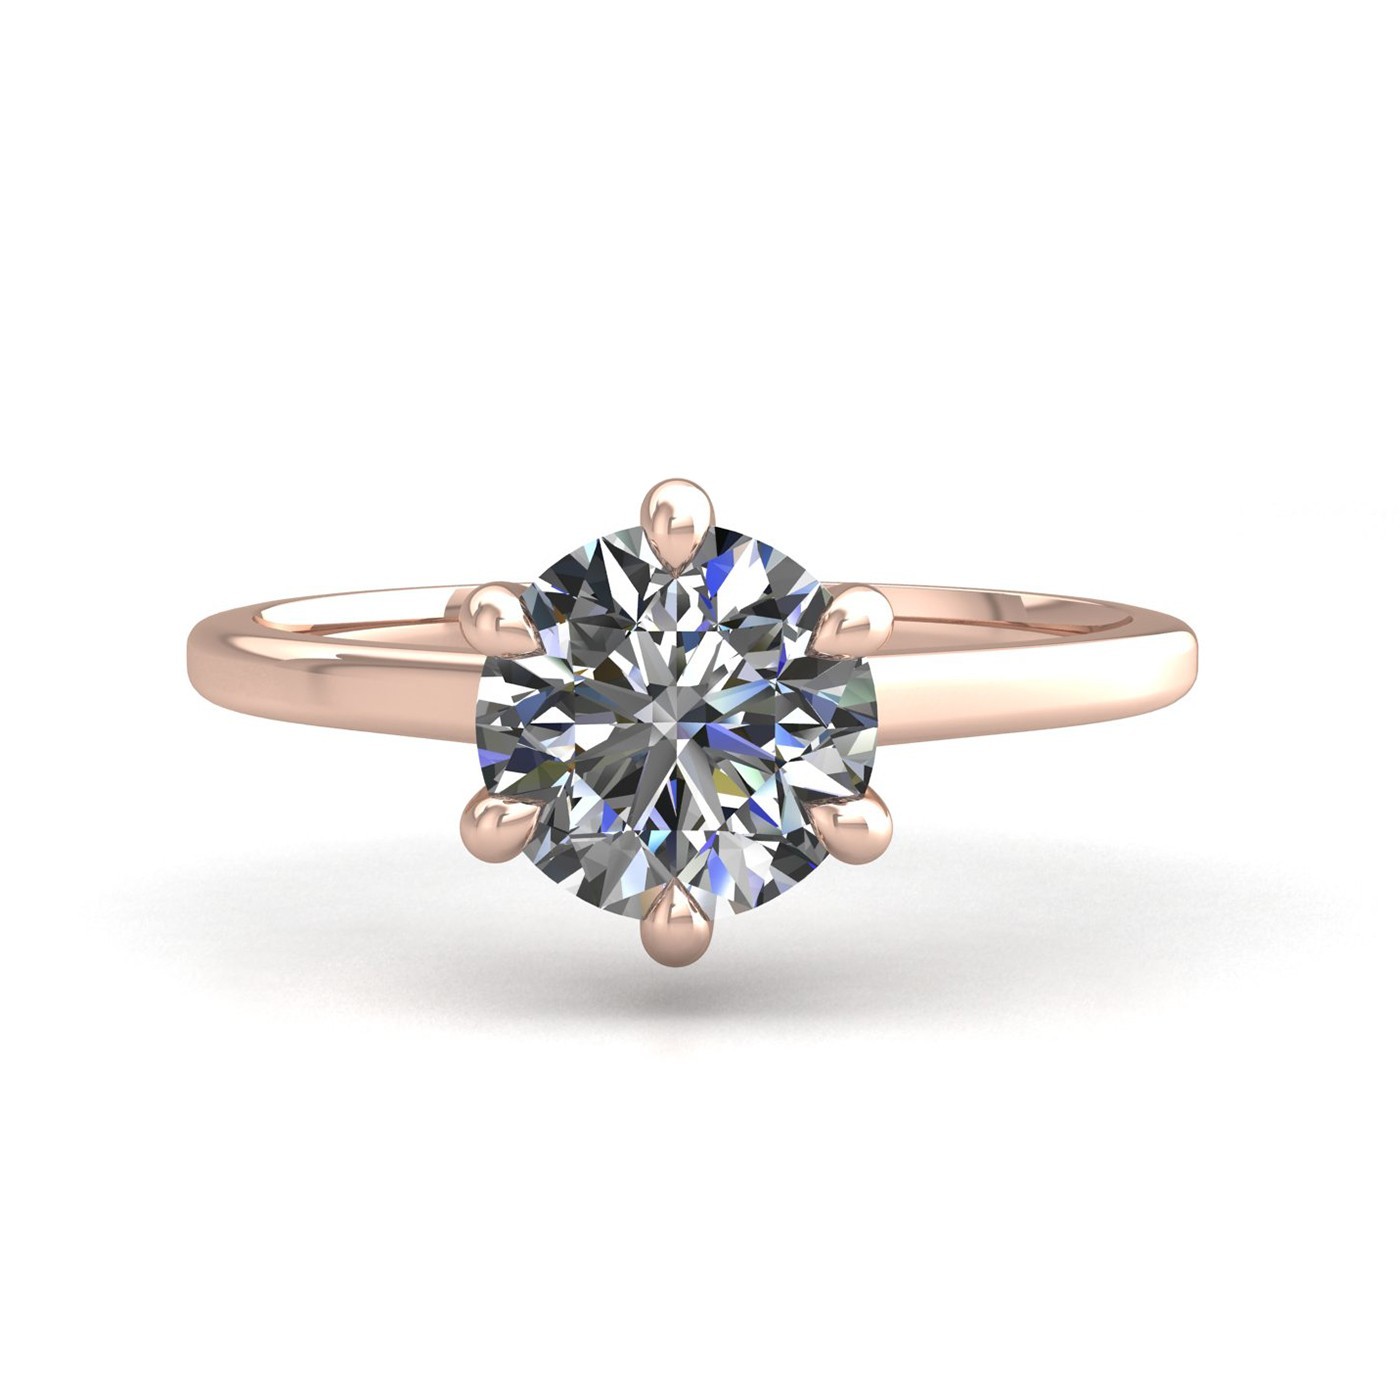 18k rose gold 1,50 ct 6 prongs solitaire round cut diamond engagement ring with whisper thin band Photos & images